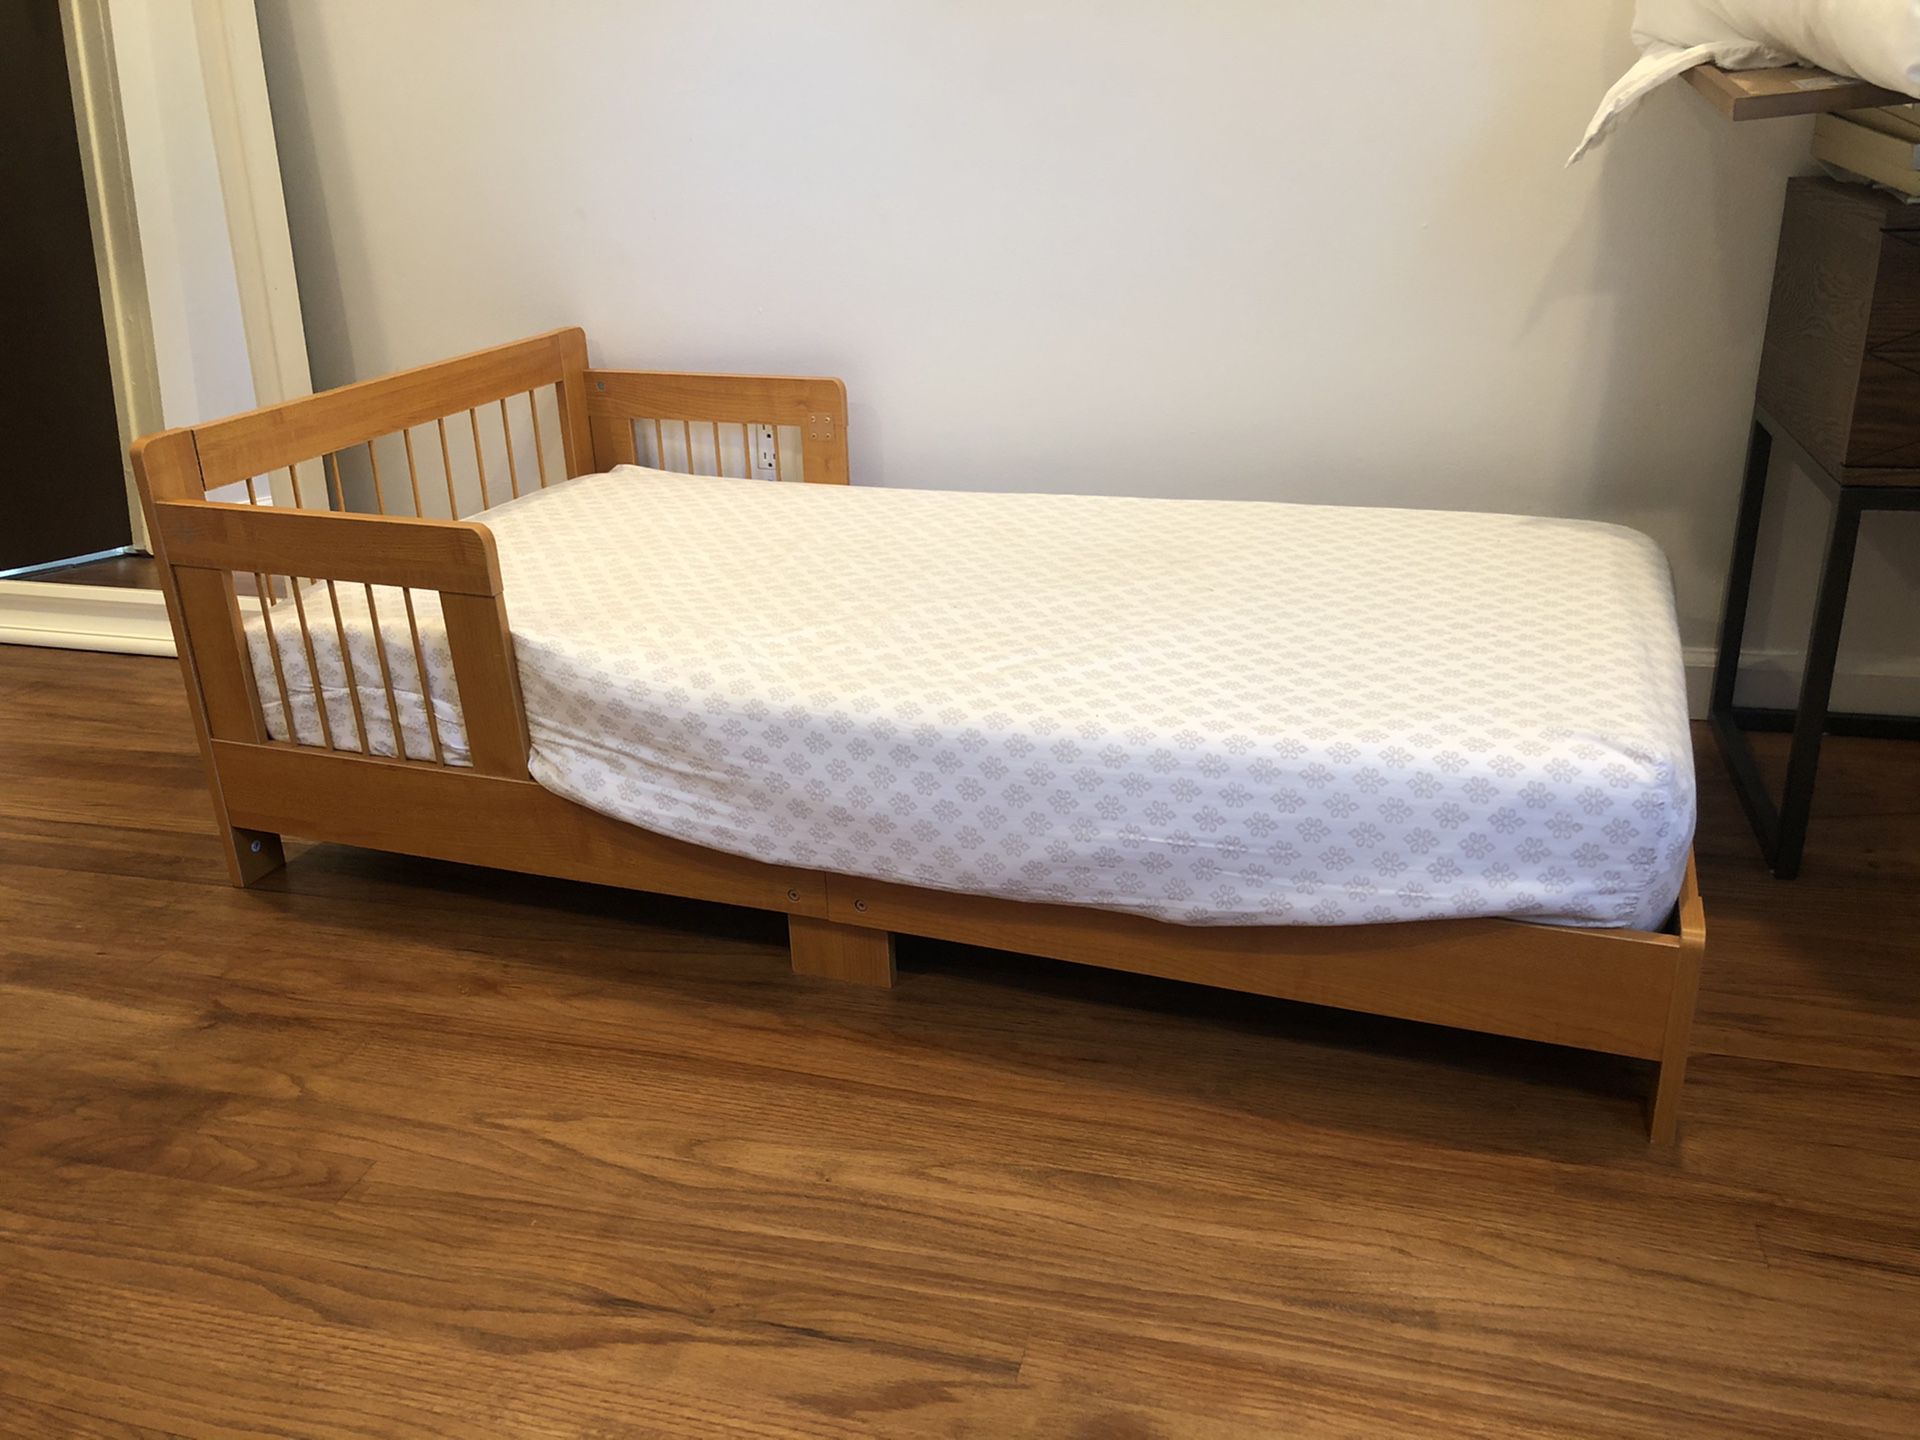 New toddler bed